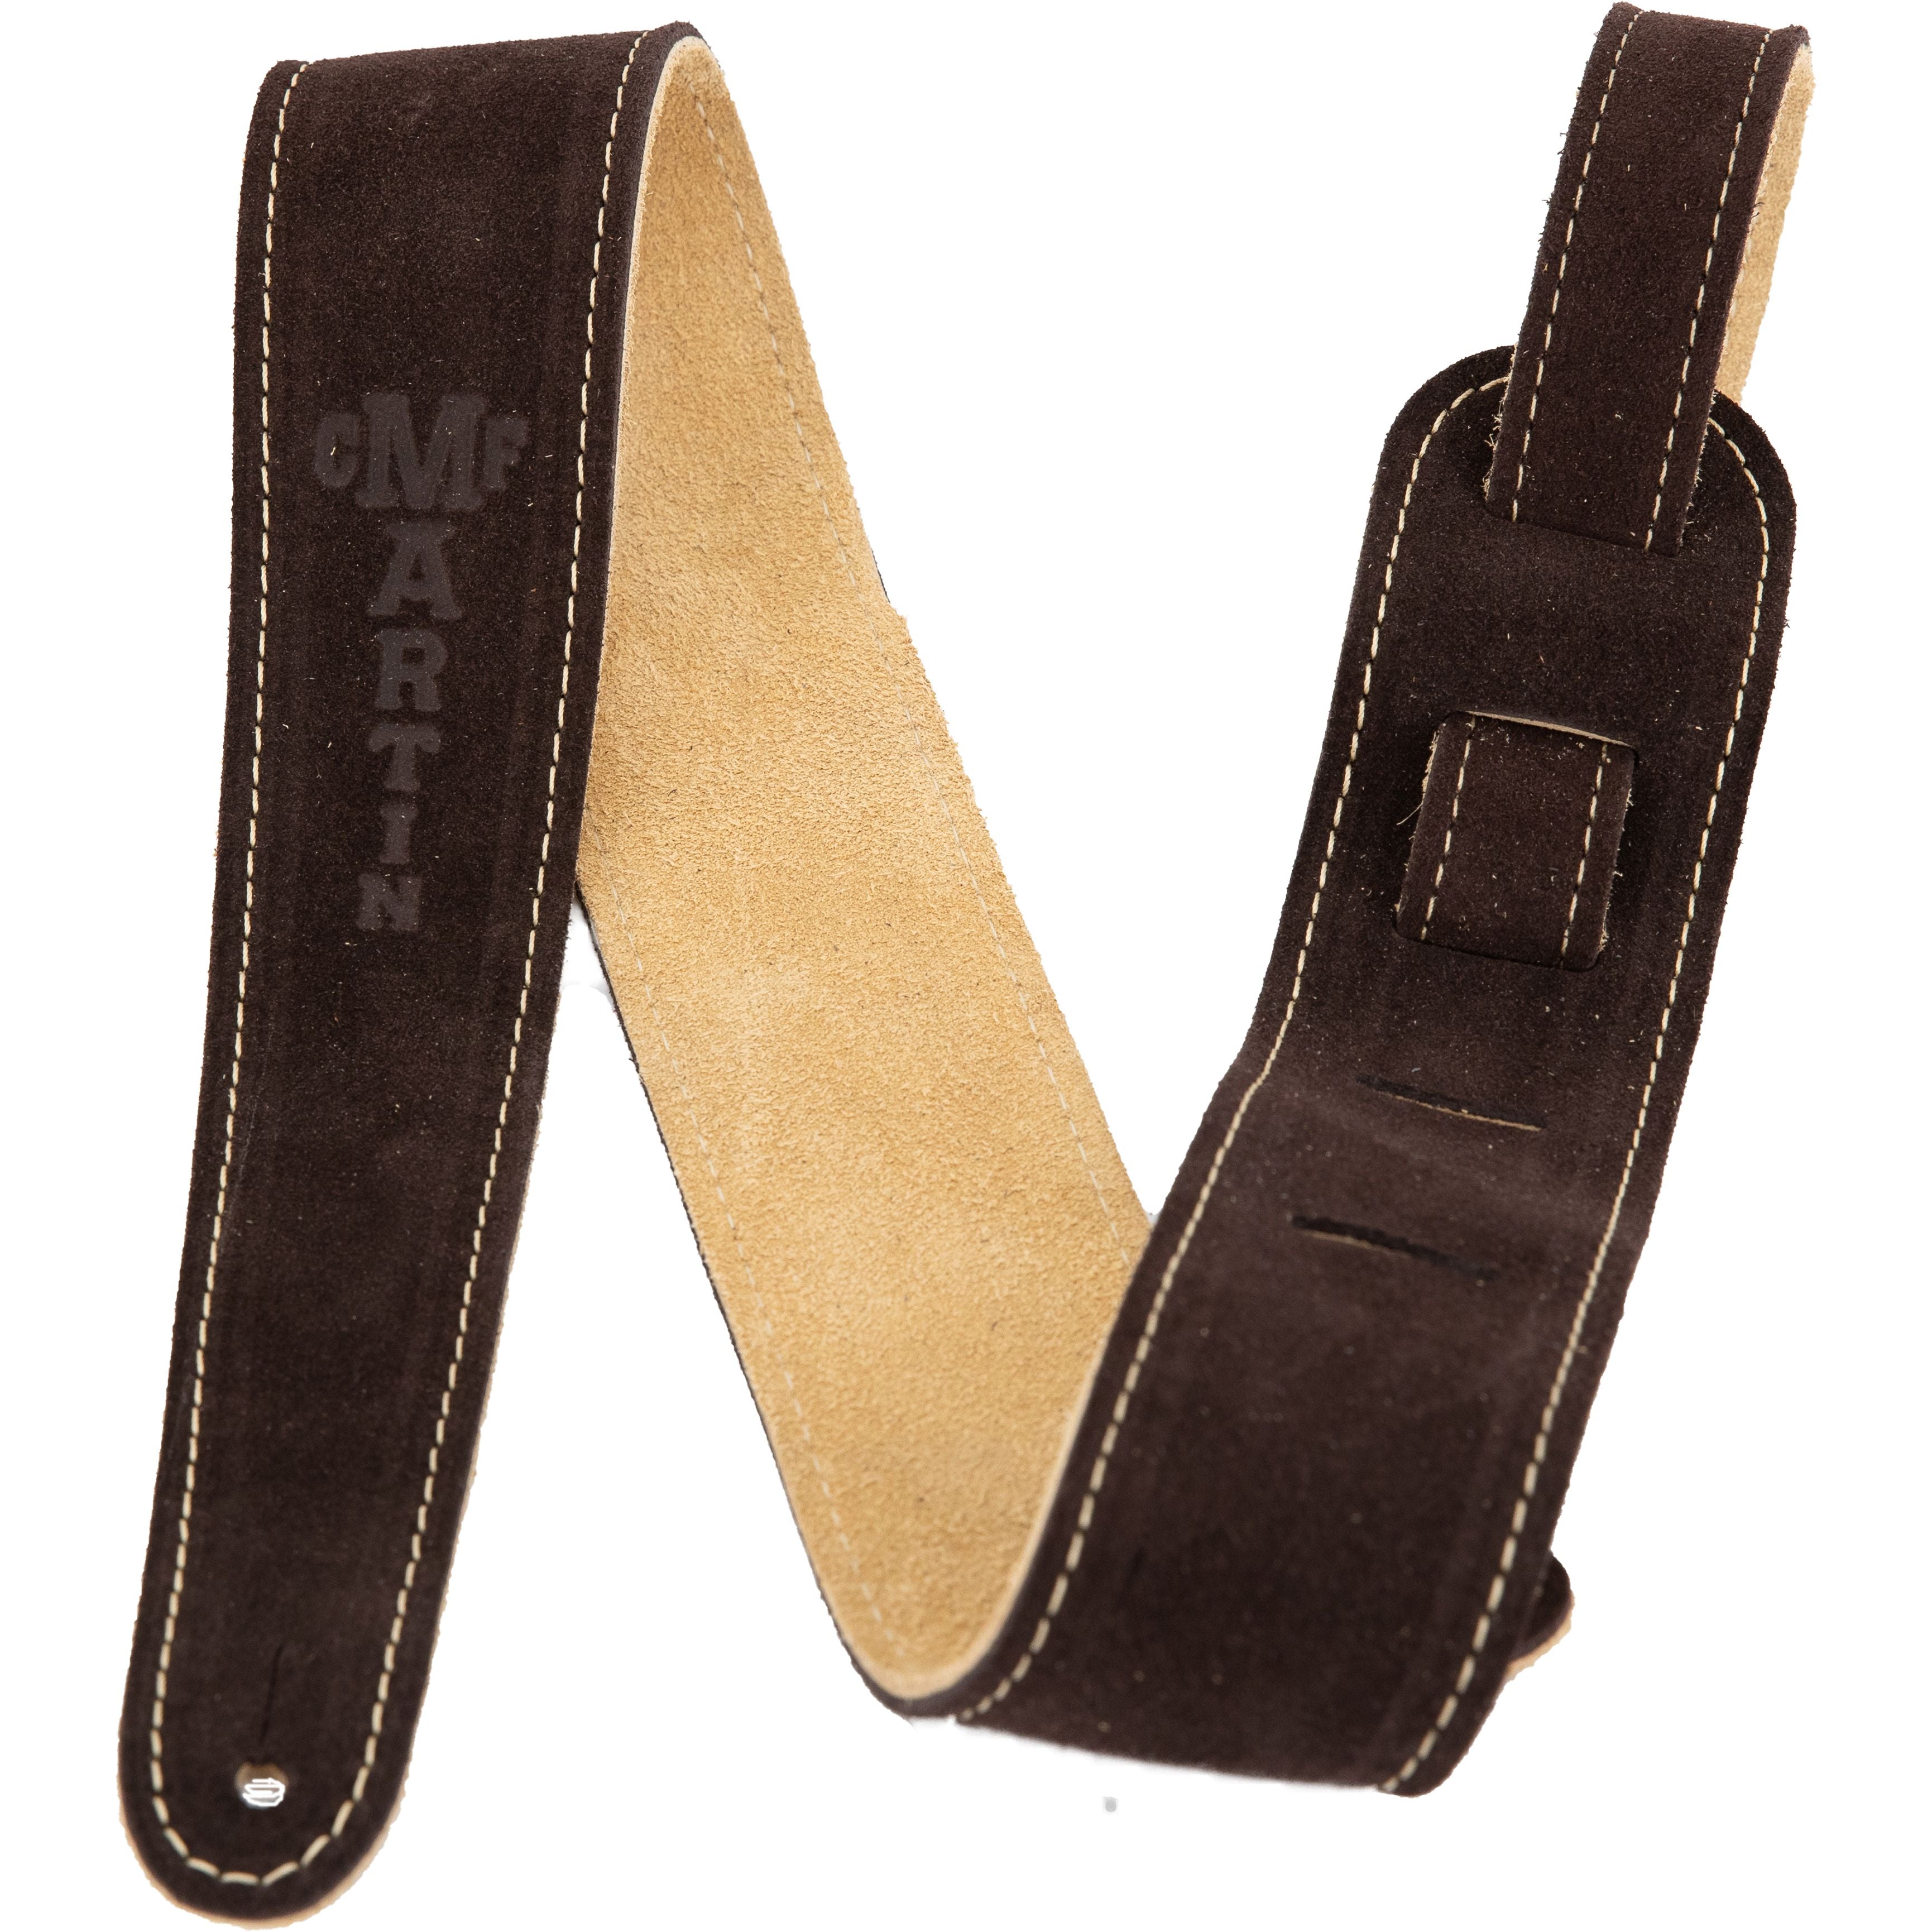 Martin Suede Leather Strap Brown (A0017)